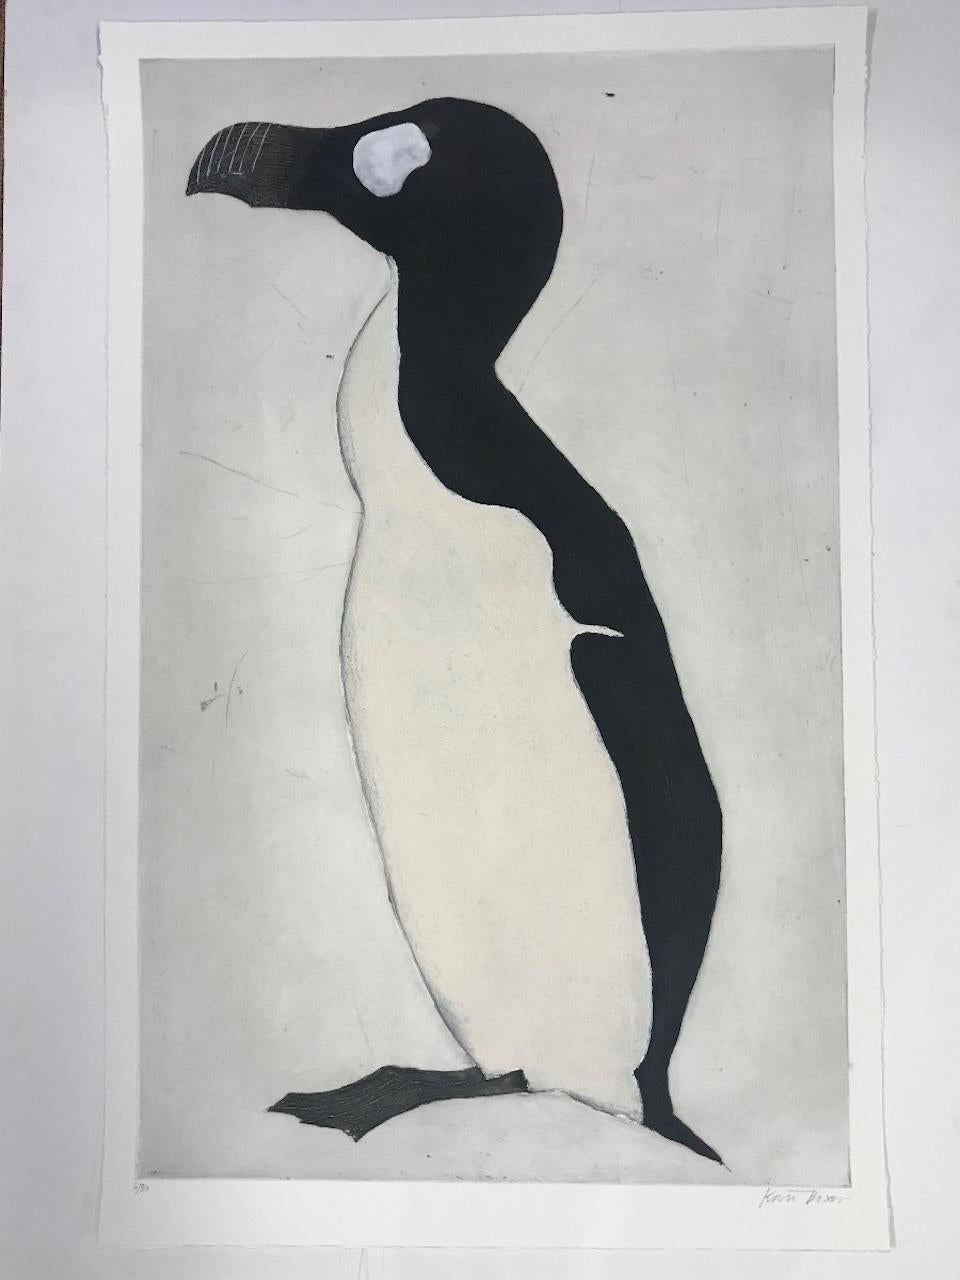 Great Auk by Kate boxer consists of white and black tones outlining the hand coloured Great Auk.

ADDITIONAL INFORMATION:
Sold unframed
Limited Edition of 30
Made with Drypoint, carborundum and hand coloured

Please note that insitu images are